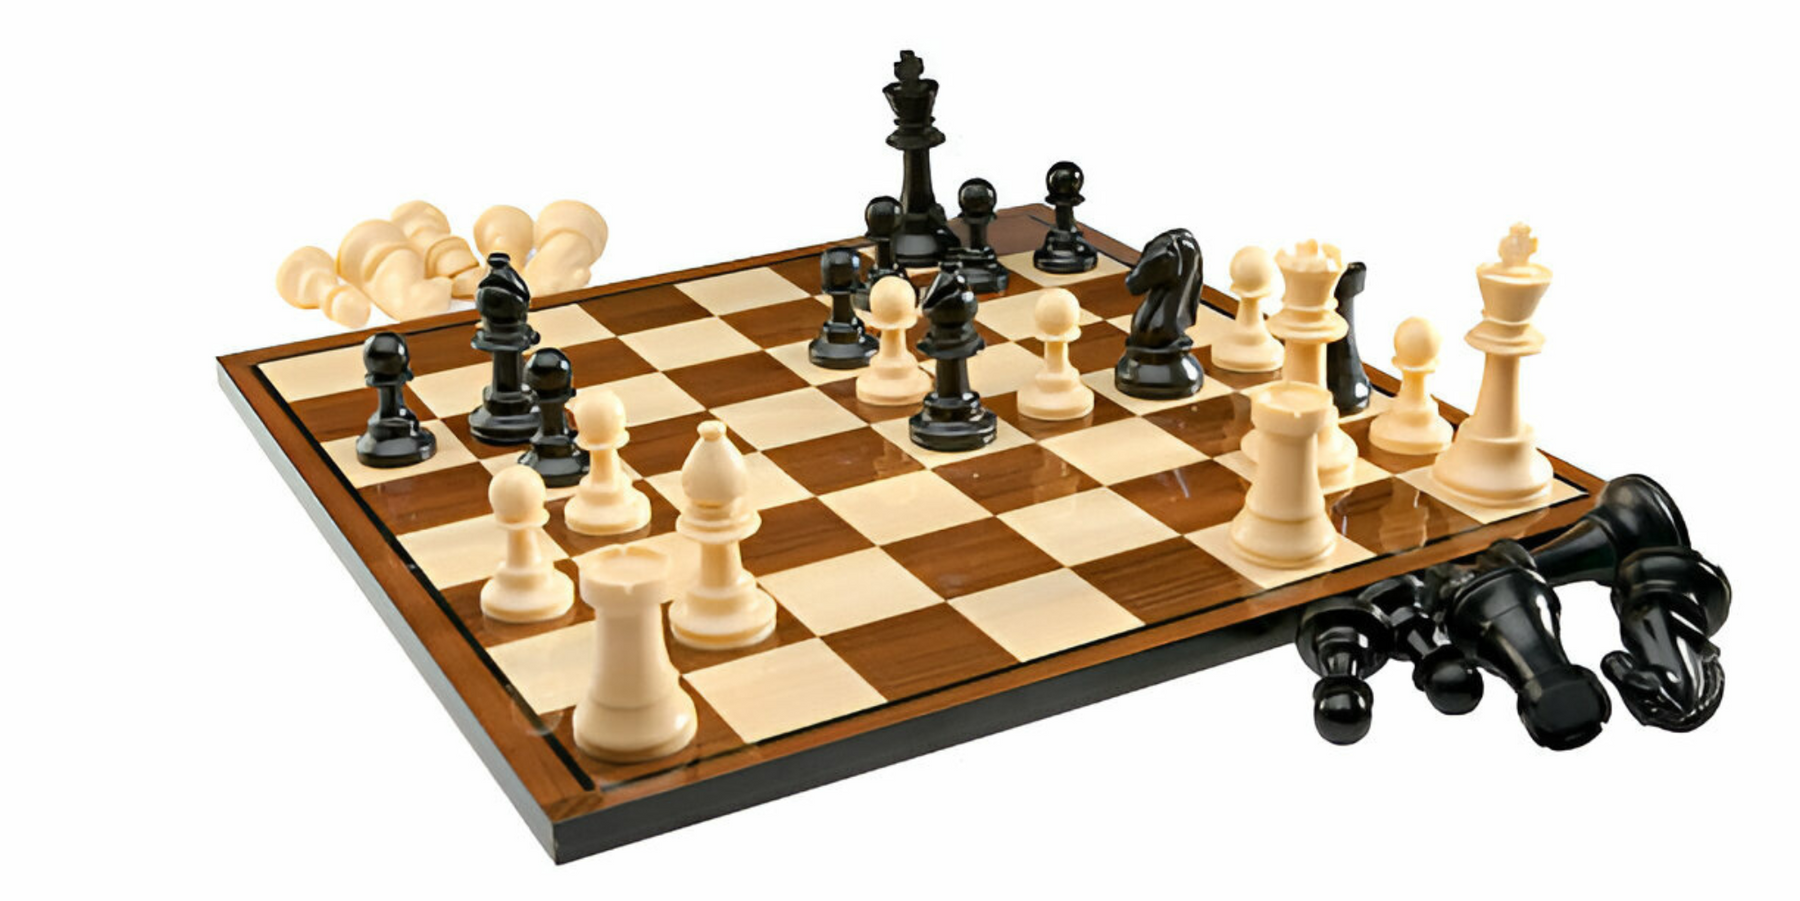 Challenge Accepted: Finding the Chessboard that Matches Your Skill Level